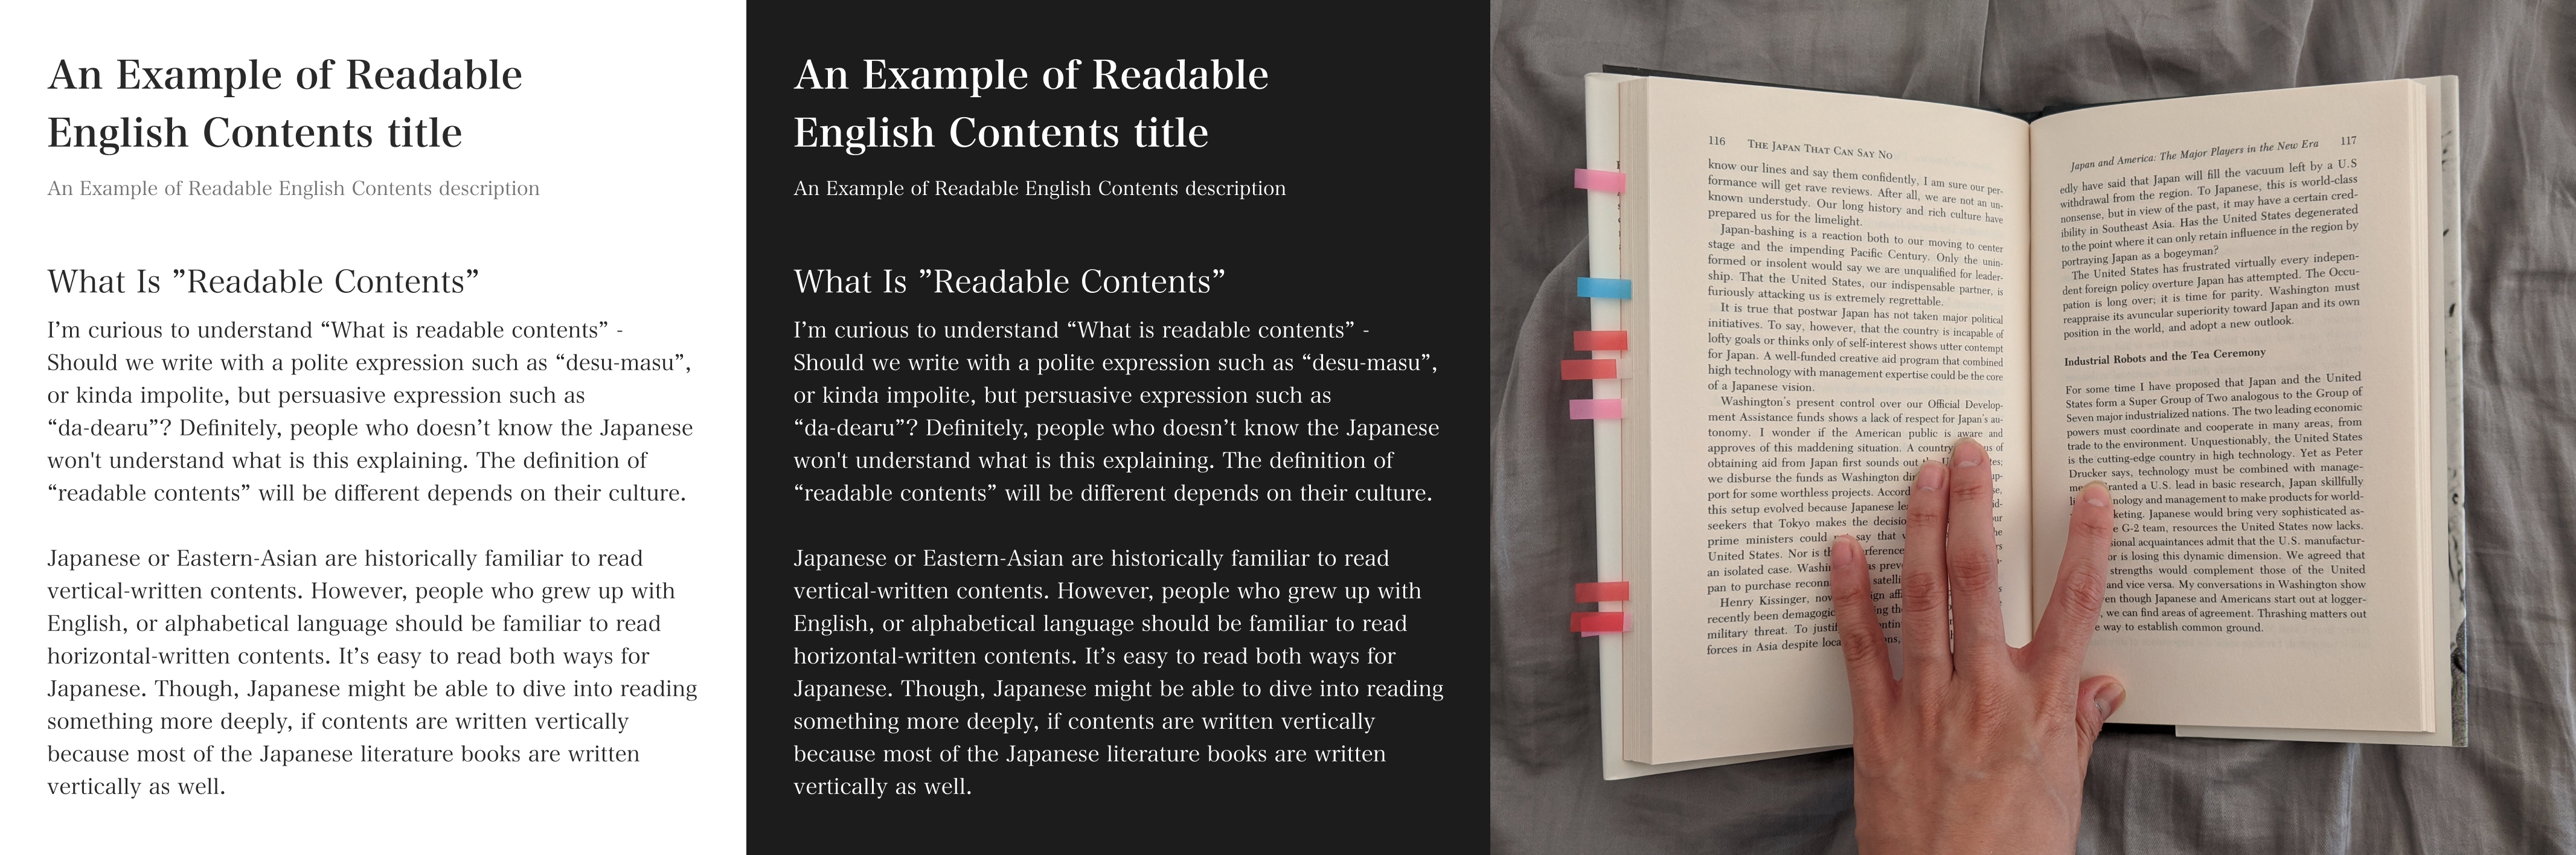 Examples of readable article - English